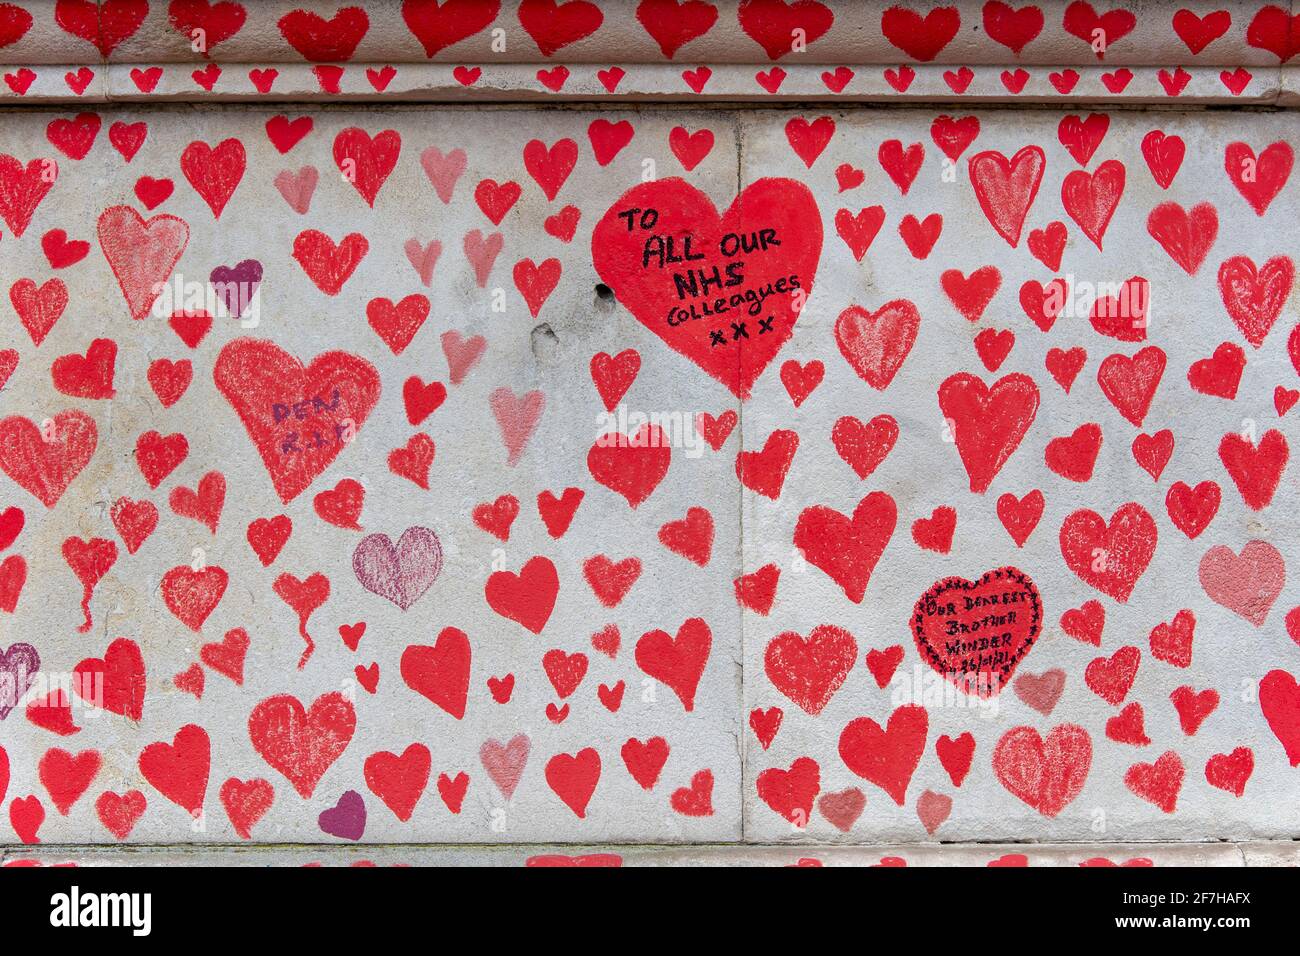 A message on a heart for the NHS workers who lost their lives seen on the National Covid Memorial Wall.The wall is adjacent to St Thomas' Hospital and is being hand-painted with 150000 hearts to honour UK Covid-19 victims, it stretches over 700 metres long. Stock Photo